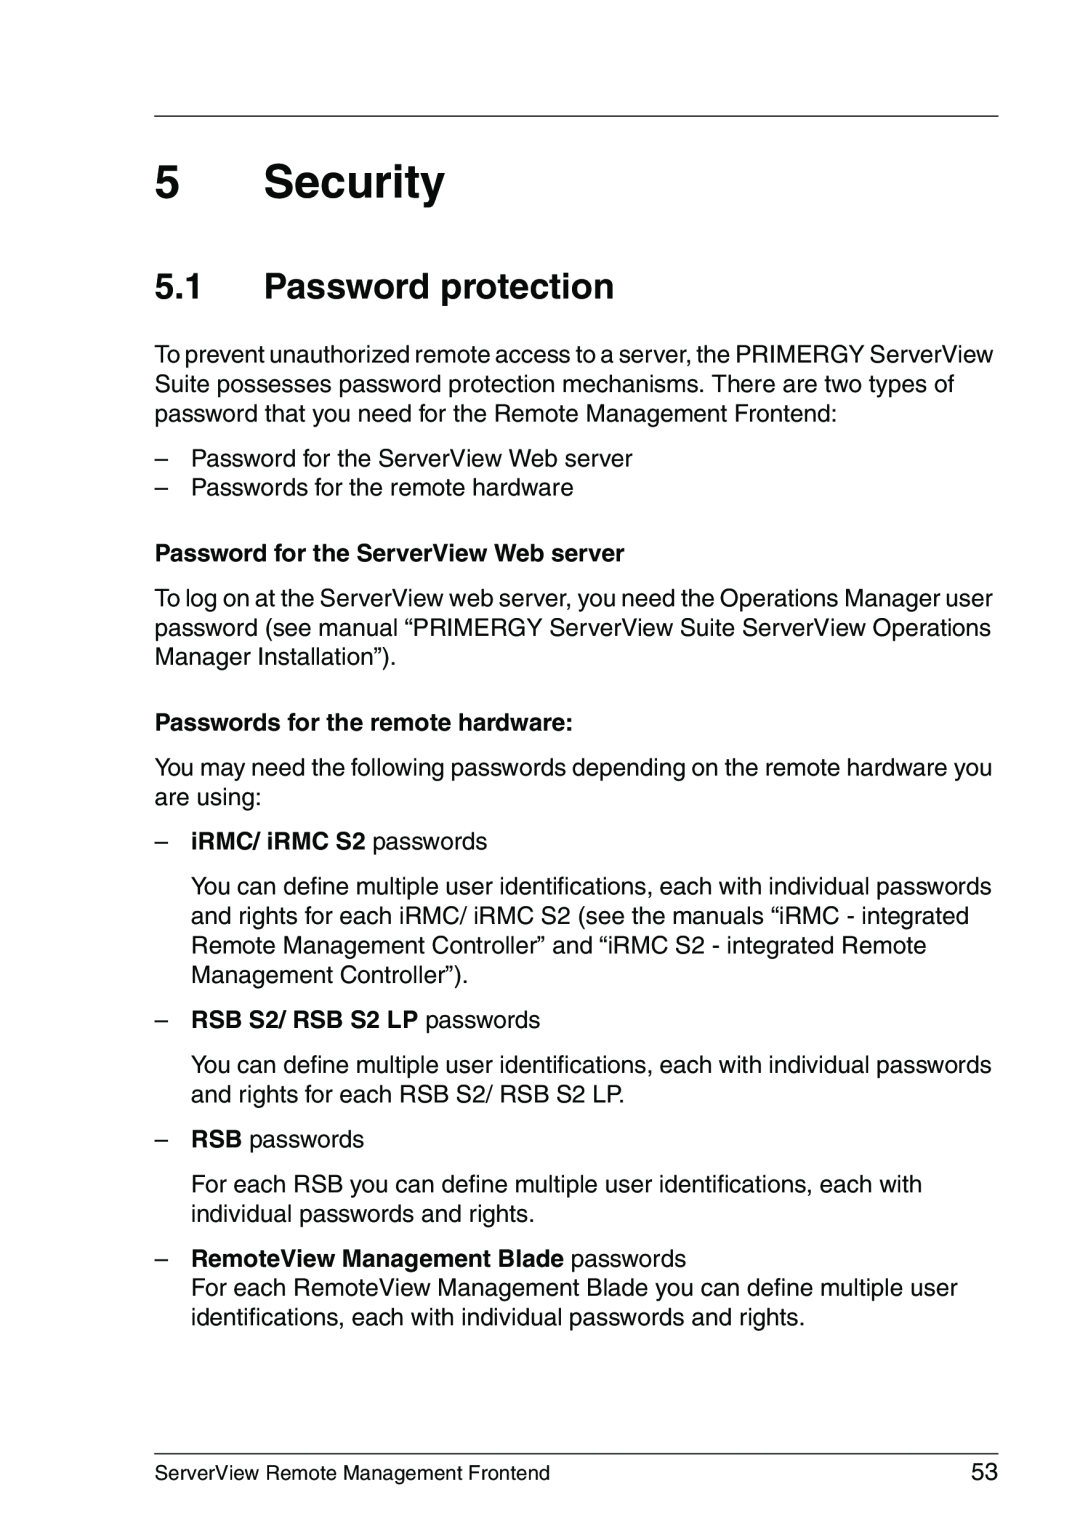 Fujitsu V4.90 Security, Password protection, Password for the ServerView Web server, Passwords for the remote hardware 